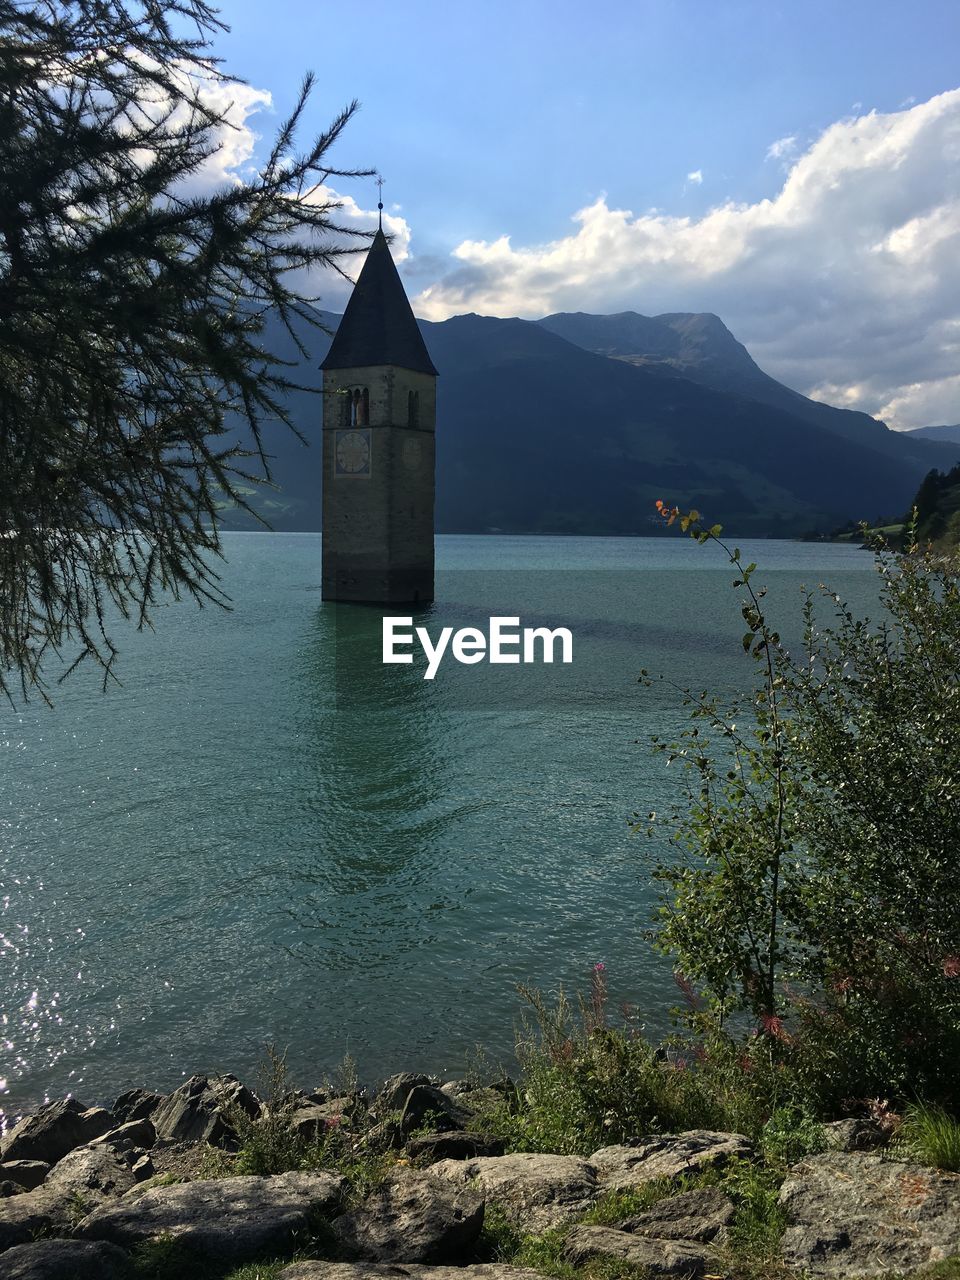 Sunken village, tower of a church in the lake